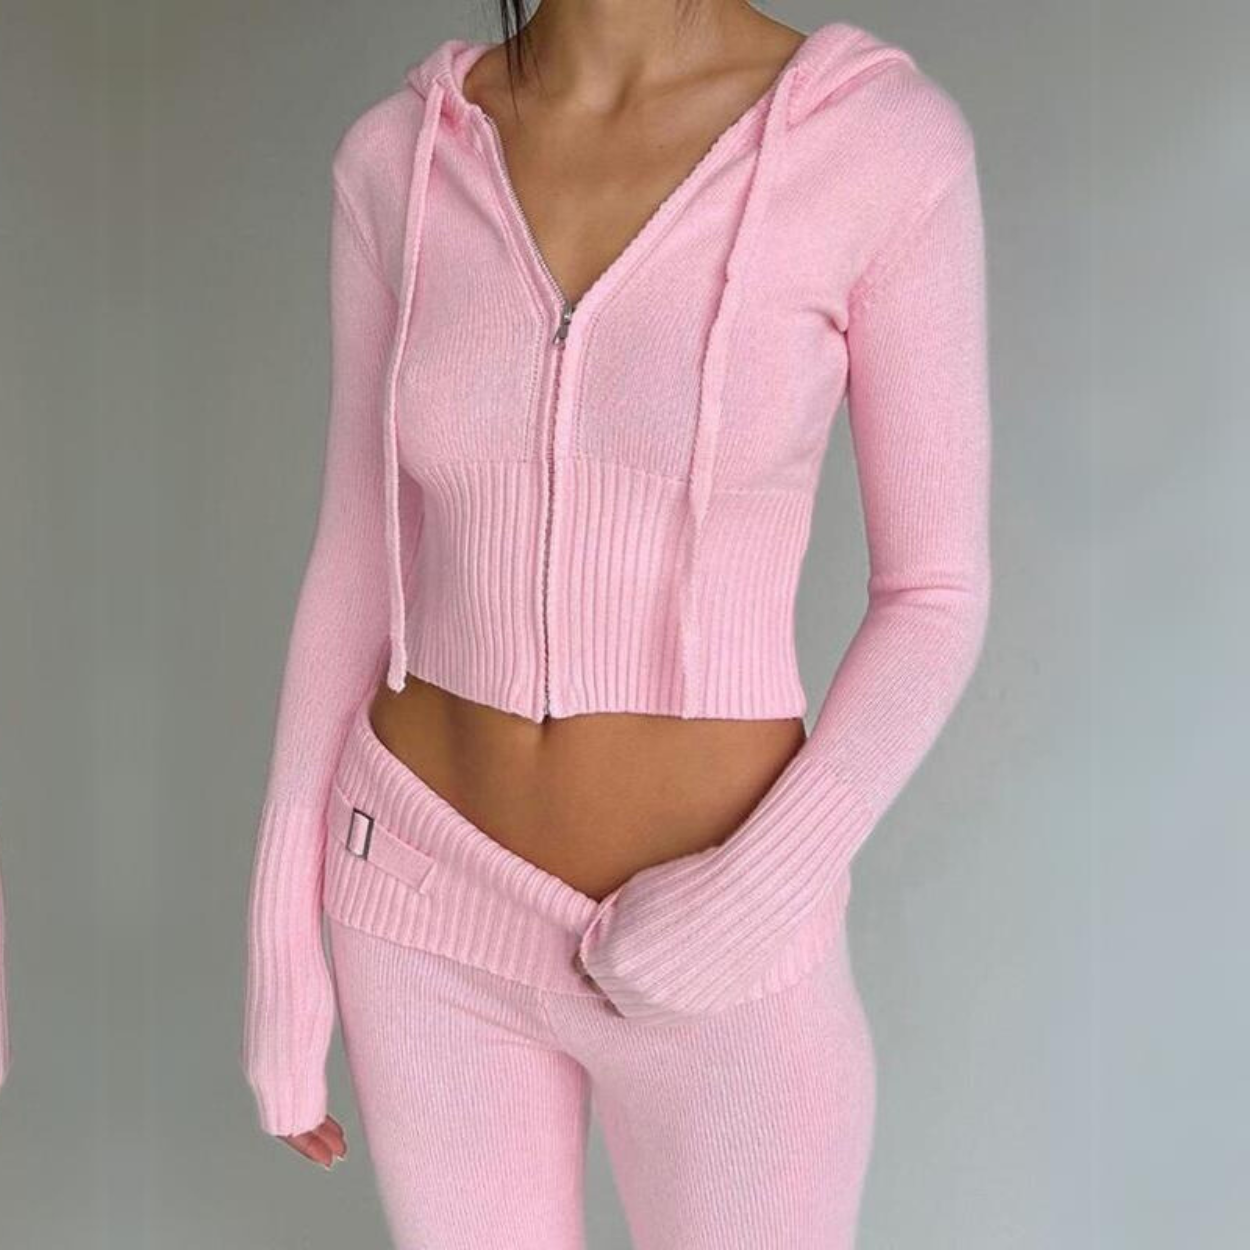 Pink Sweatsuit Set, Casual Zipper Sweater, Pink Knitted Tracksuit Set